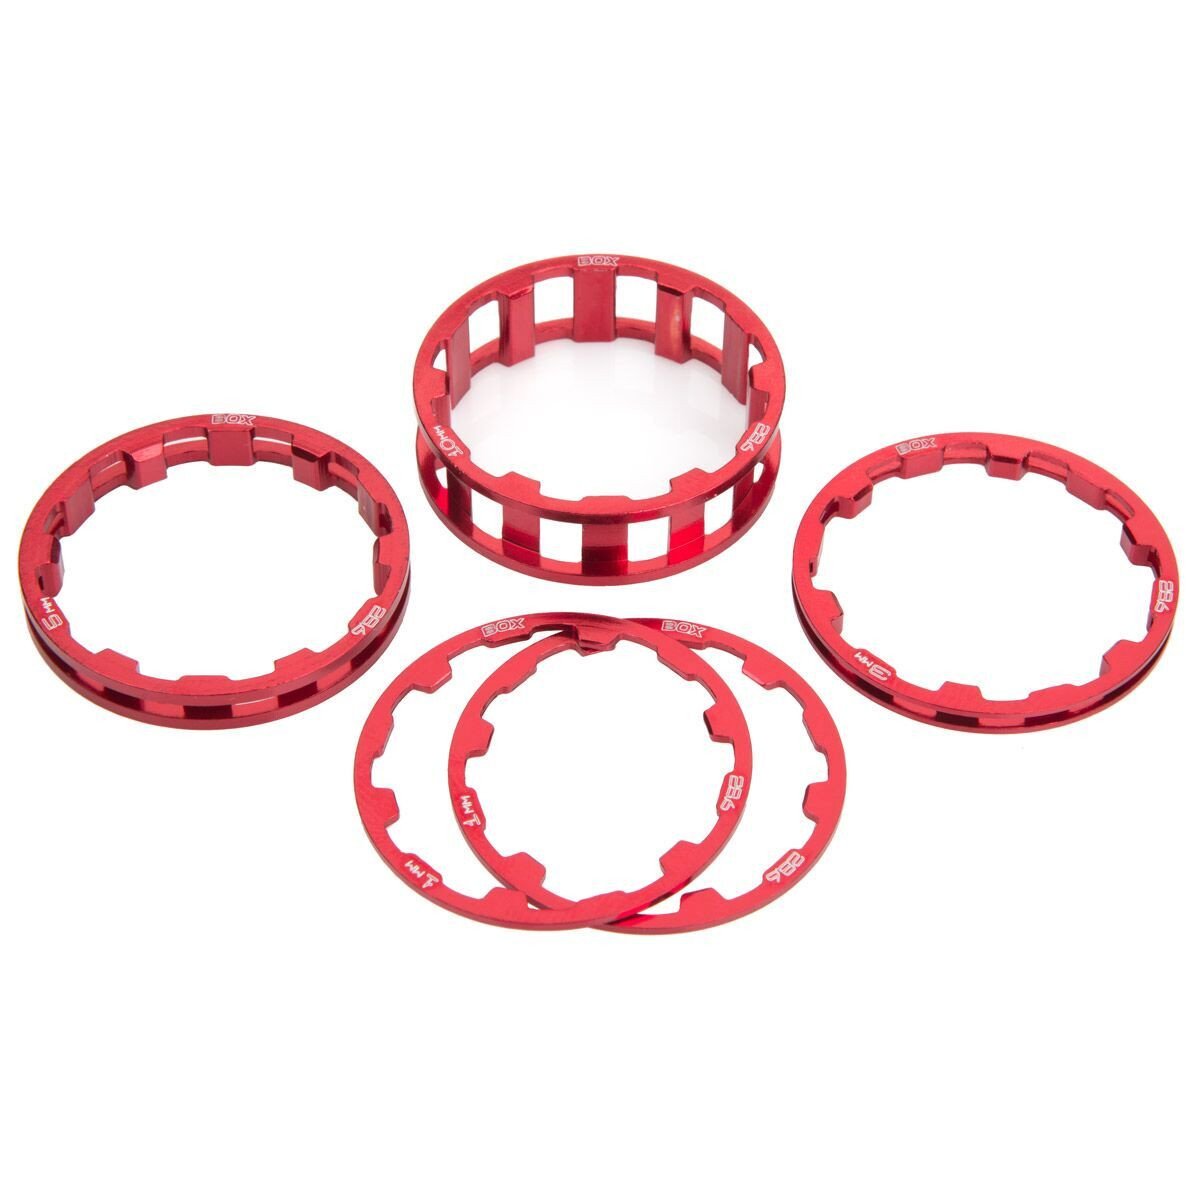 BOX ONE HEADSET SPACER KIT